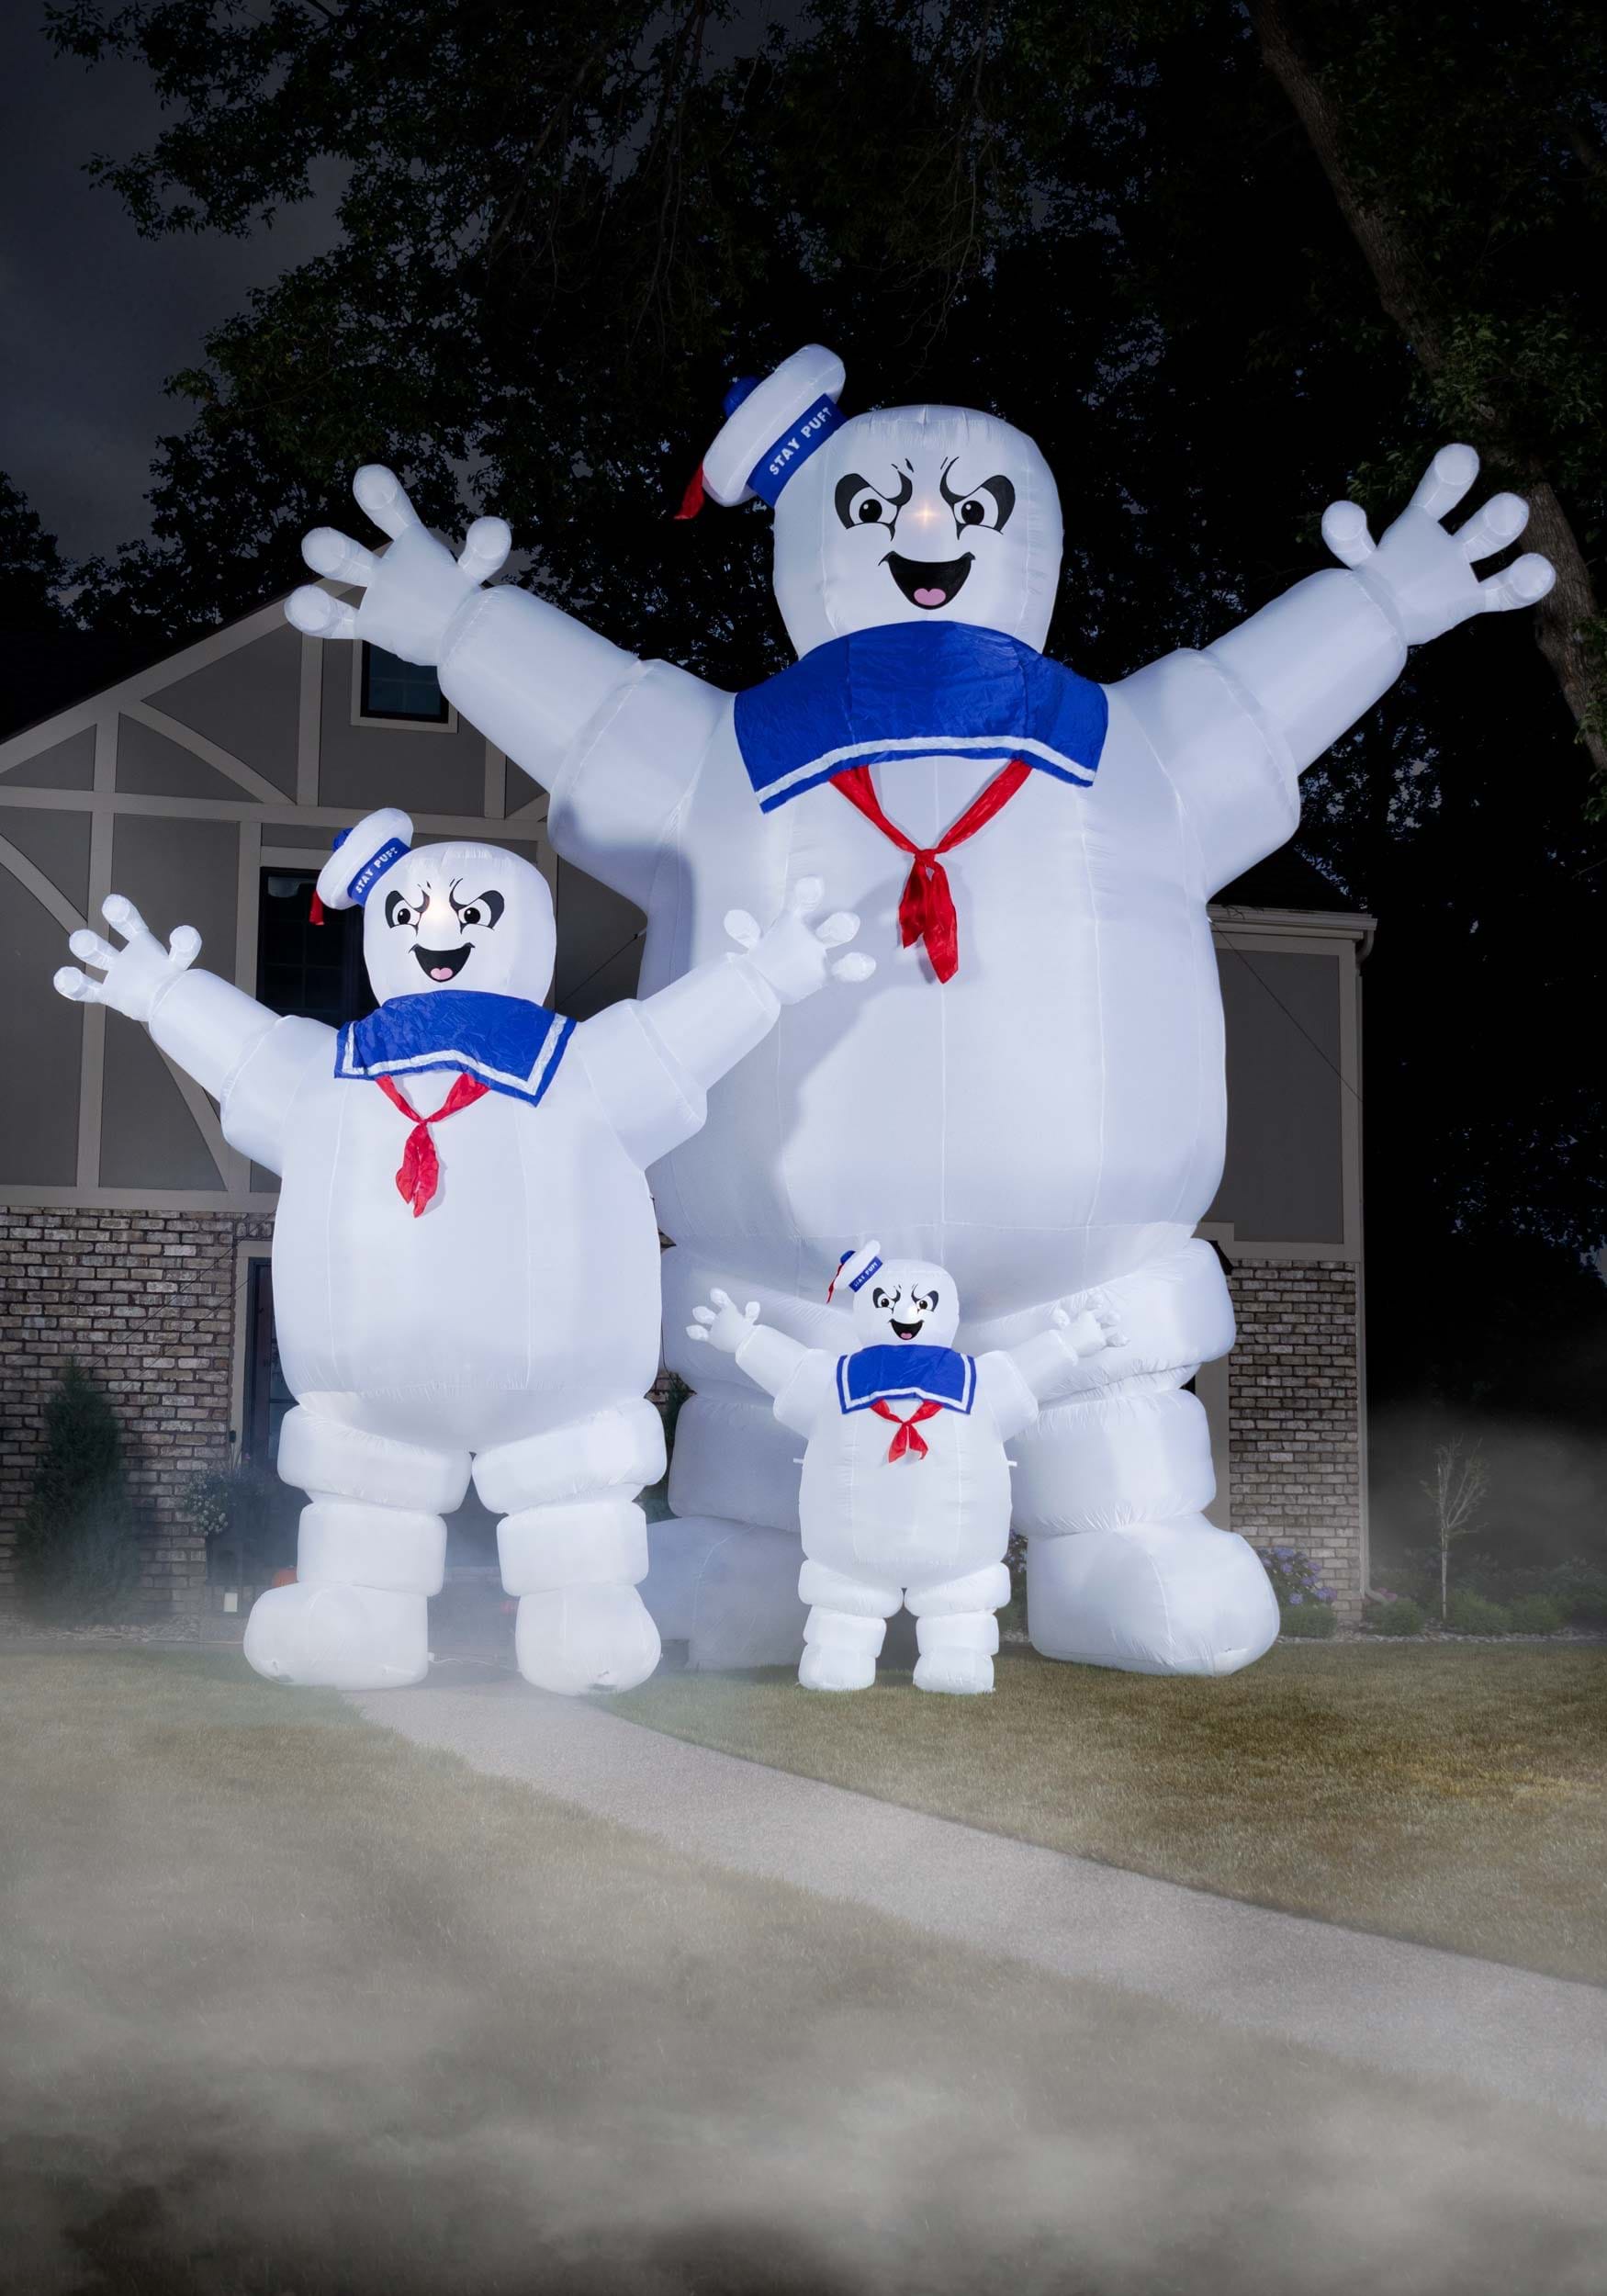 Ghostbusters Outdoor Decorations, Halloween Yard Decor - Inflatable Stay Puft Marshmallow Man Decoration 3 Sizes